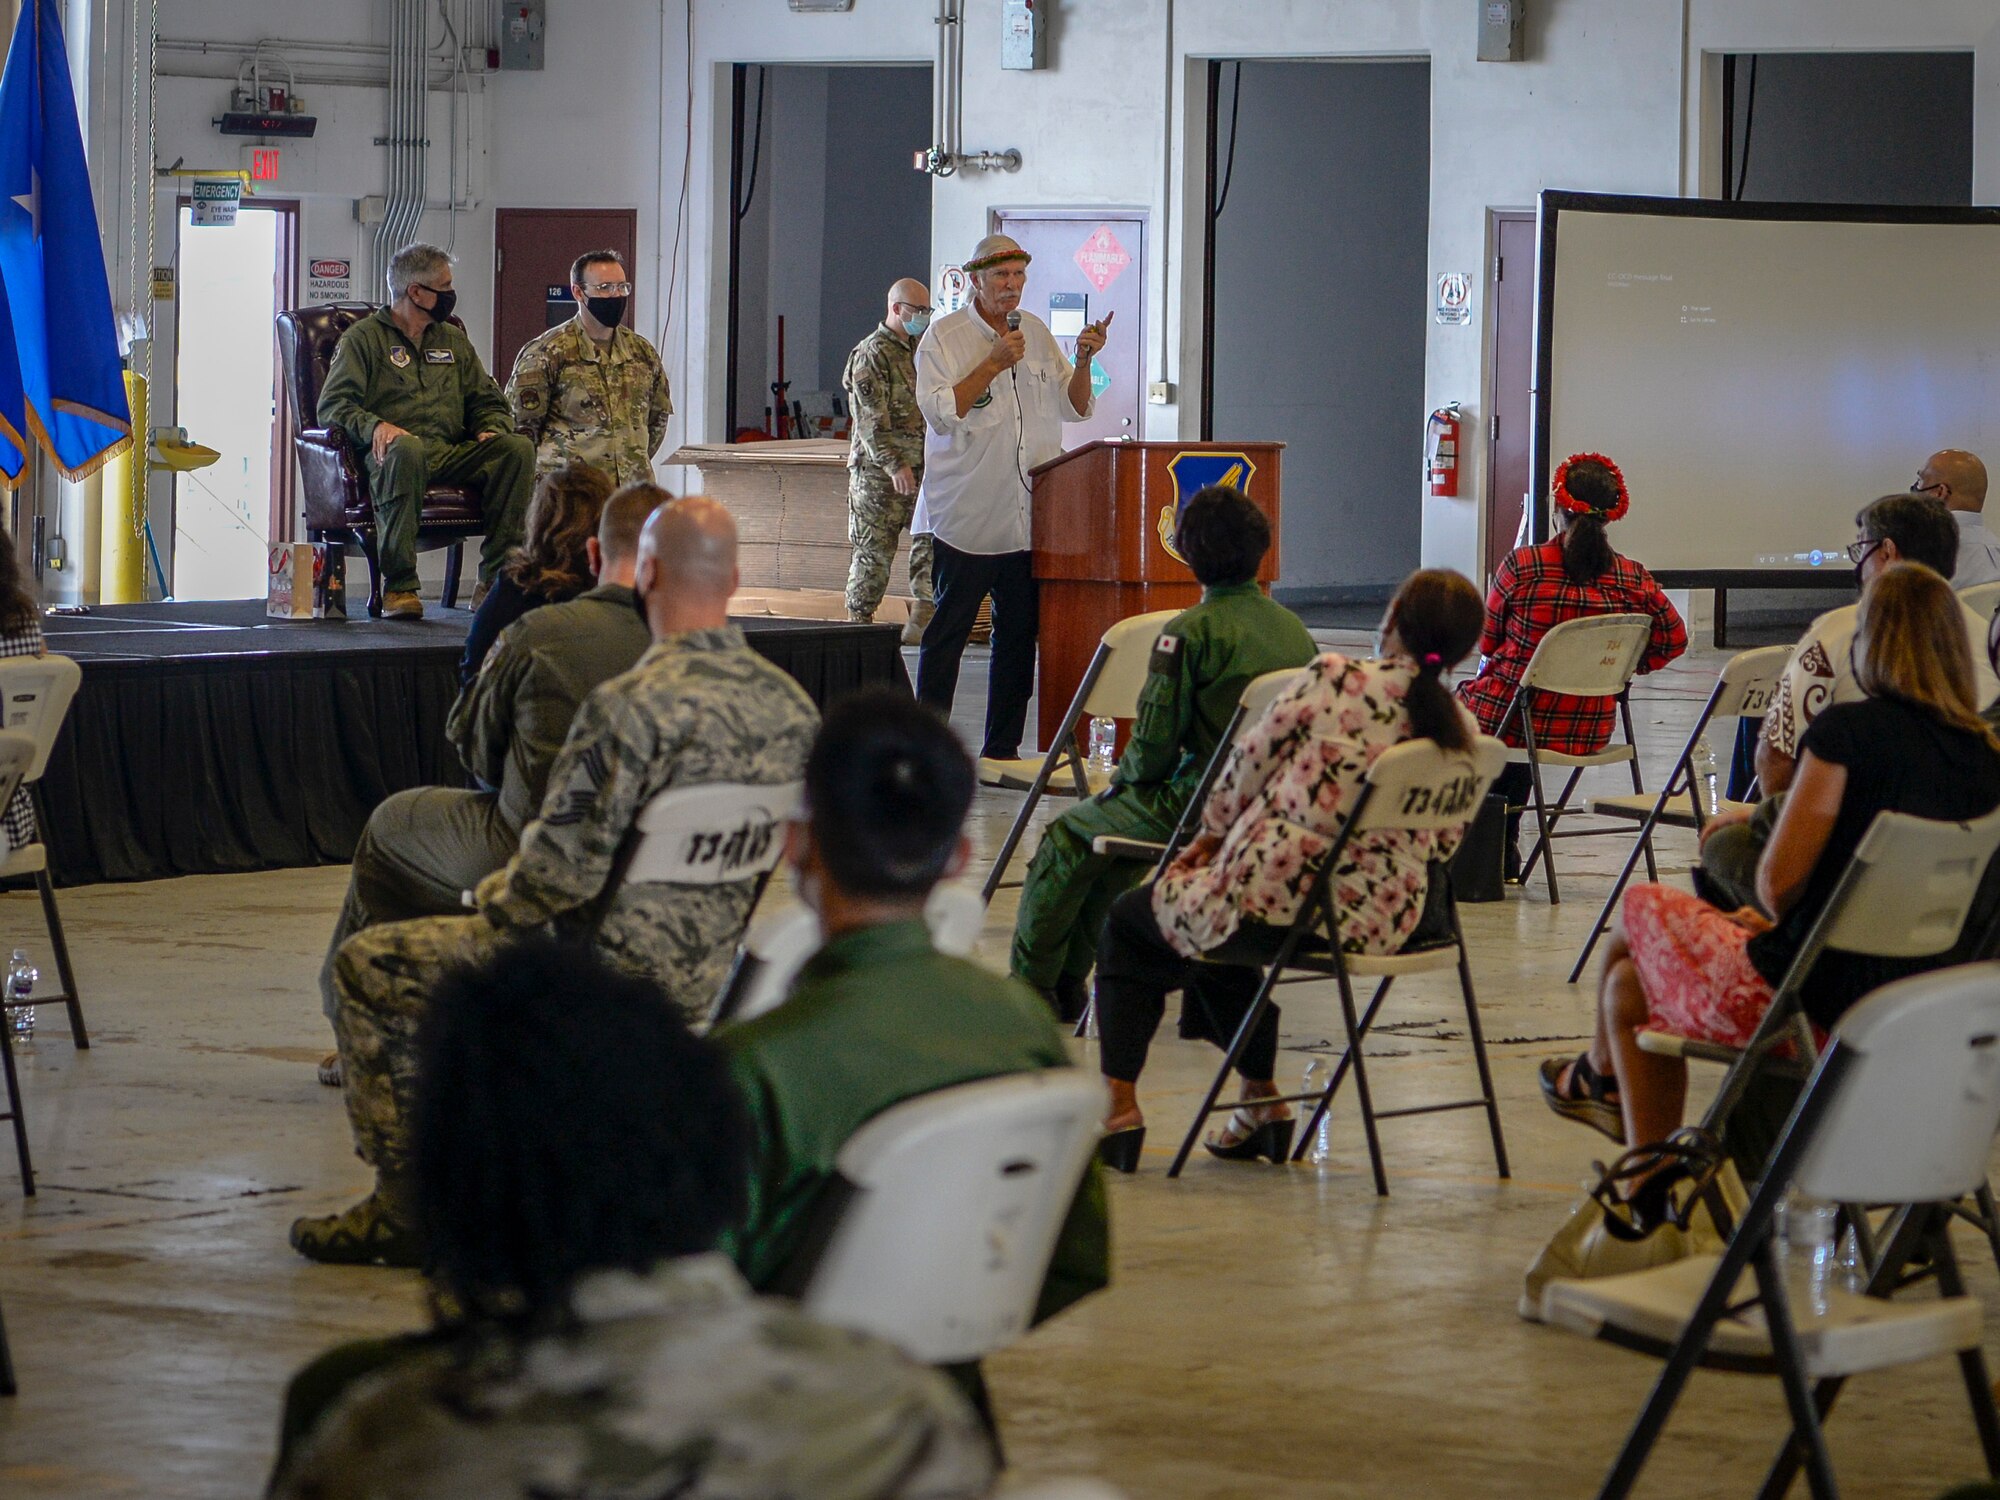 Bruce Best, telecommunication specialist to Micronesia, speaks at the Operation Christmas Drop “Push” Ceremony at Andersen Air Force Base, Guam, Dec. 7, 2020.